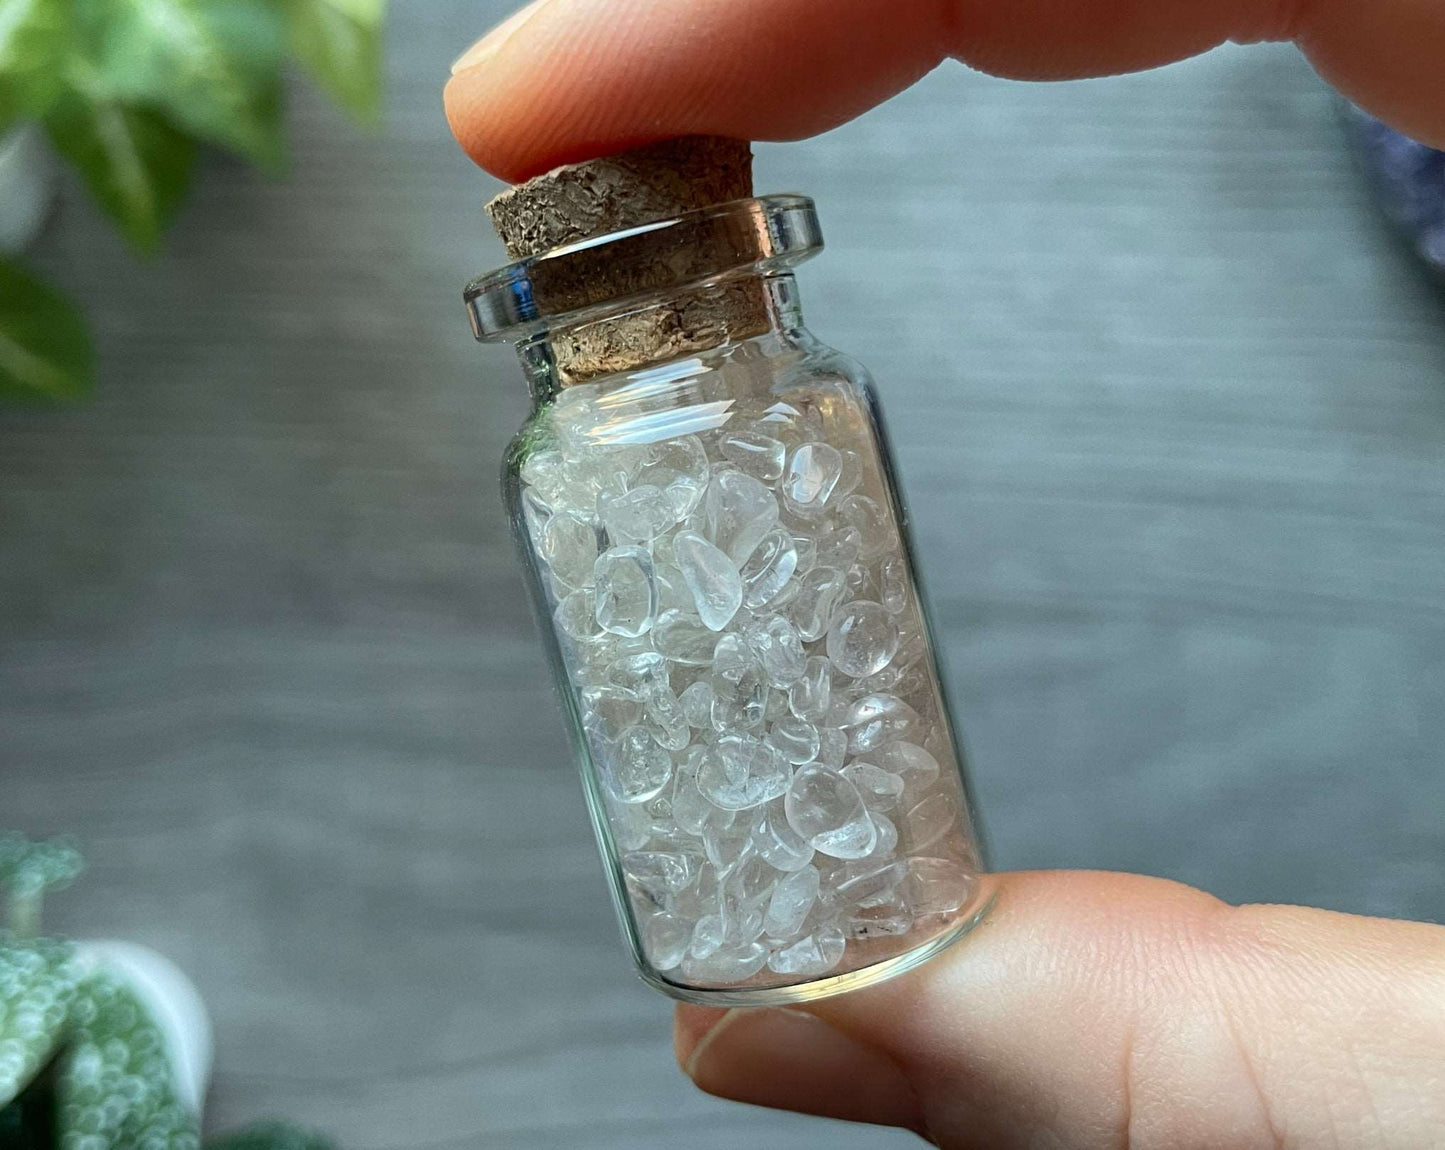 Pictured is a small glass vial with a cork stopper. Inside the jar are quartz chips.